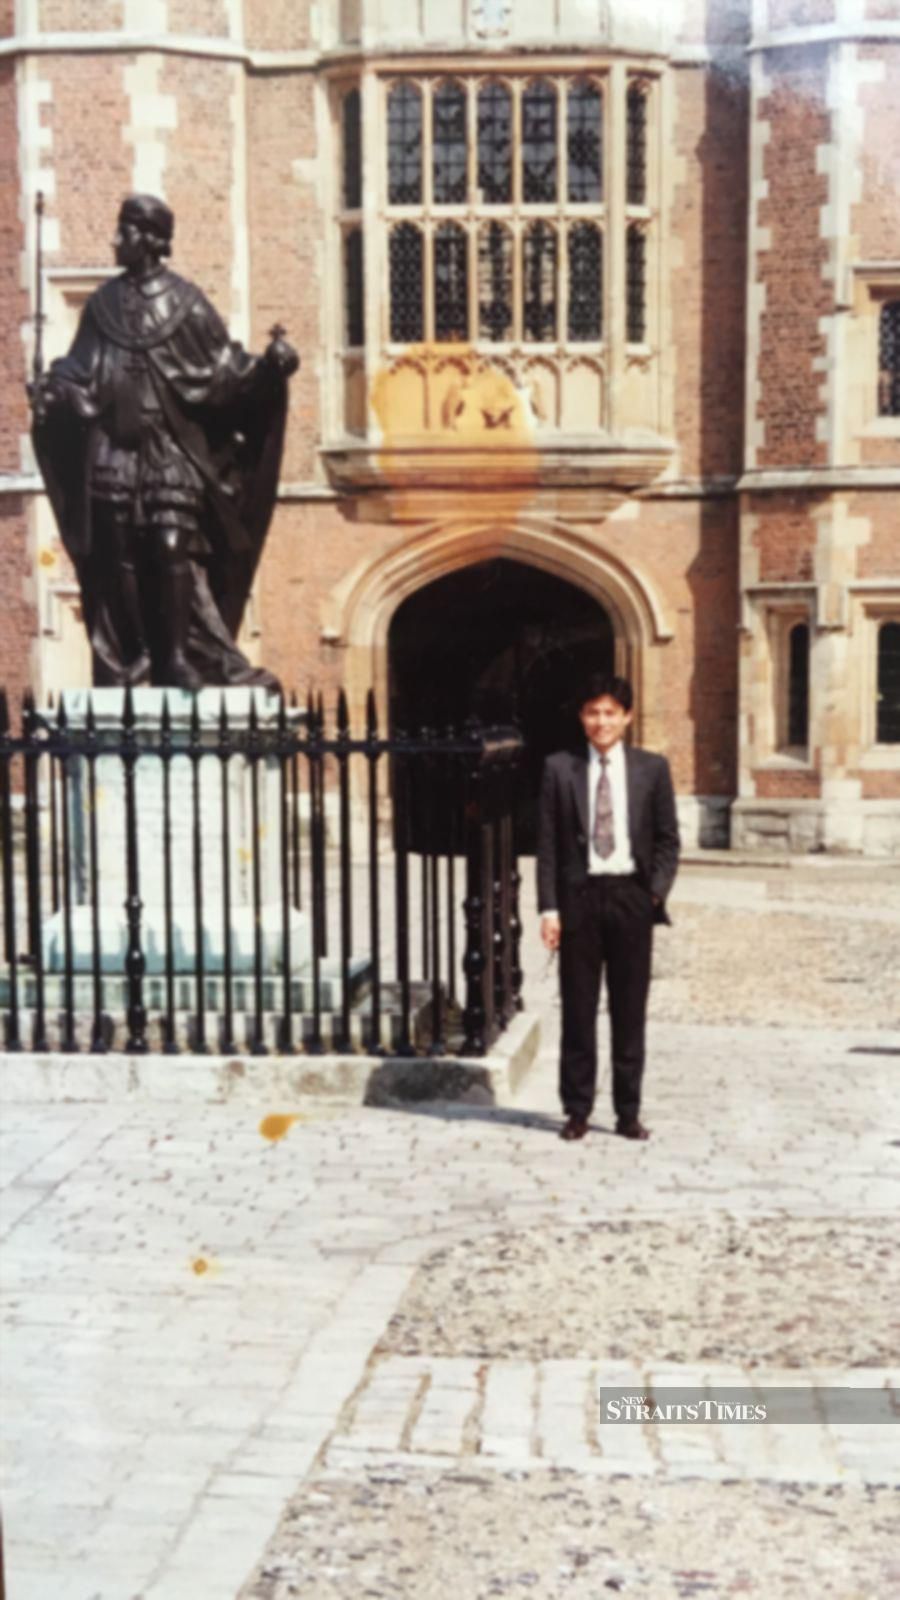  Gary posing at Eton's courtyard, one of the locations in the award-winning movie Chariots of Fire.